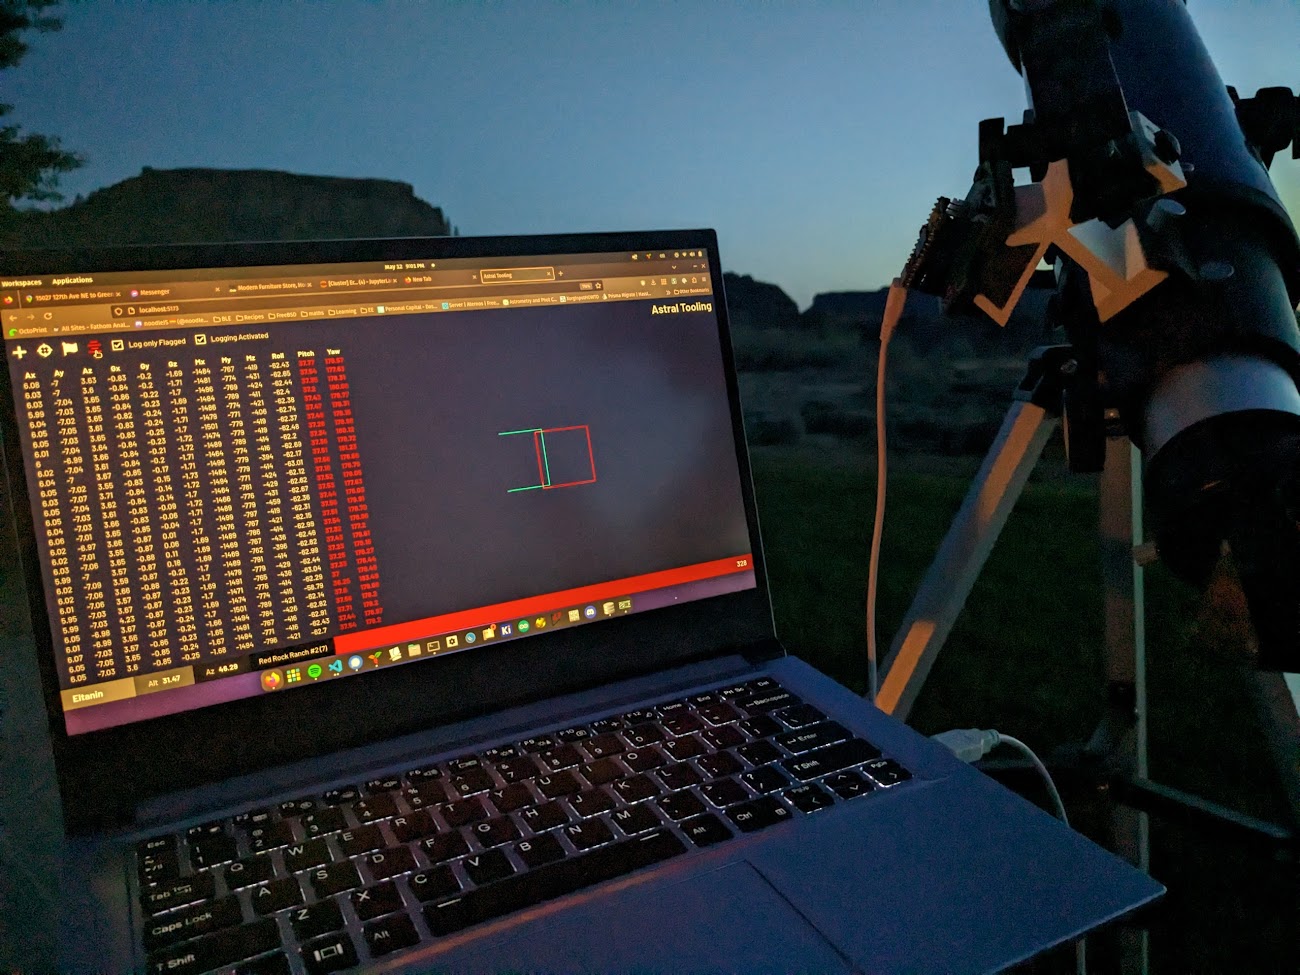 A 3 year project (still in-progress) to create hardware that attaches to your telescope and helps you find things in space. It uses a 9dof IMU to accurately calculate your position in the celestial sphere.